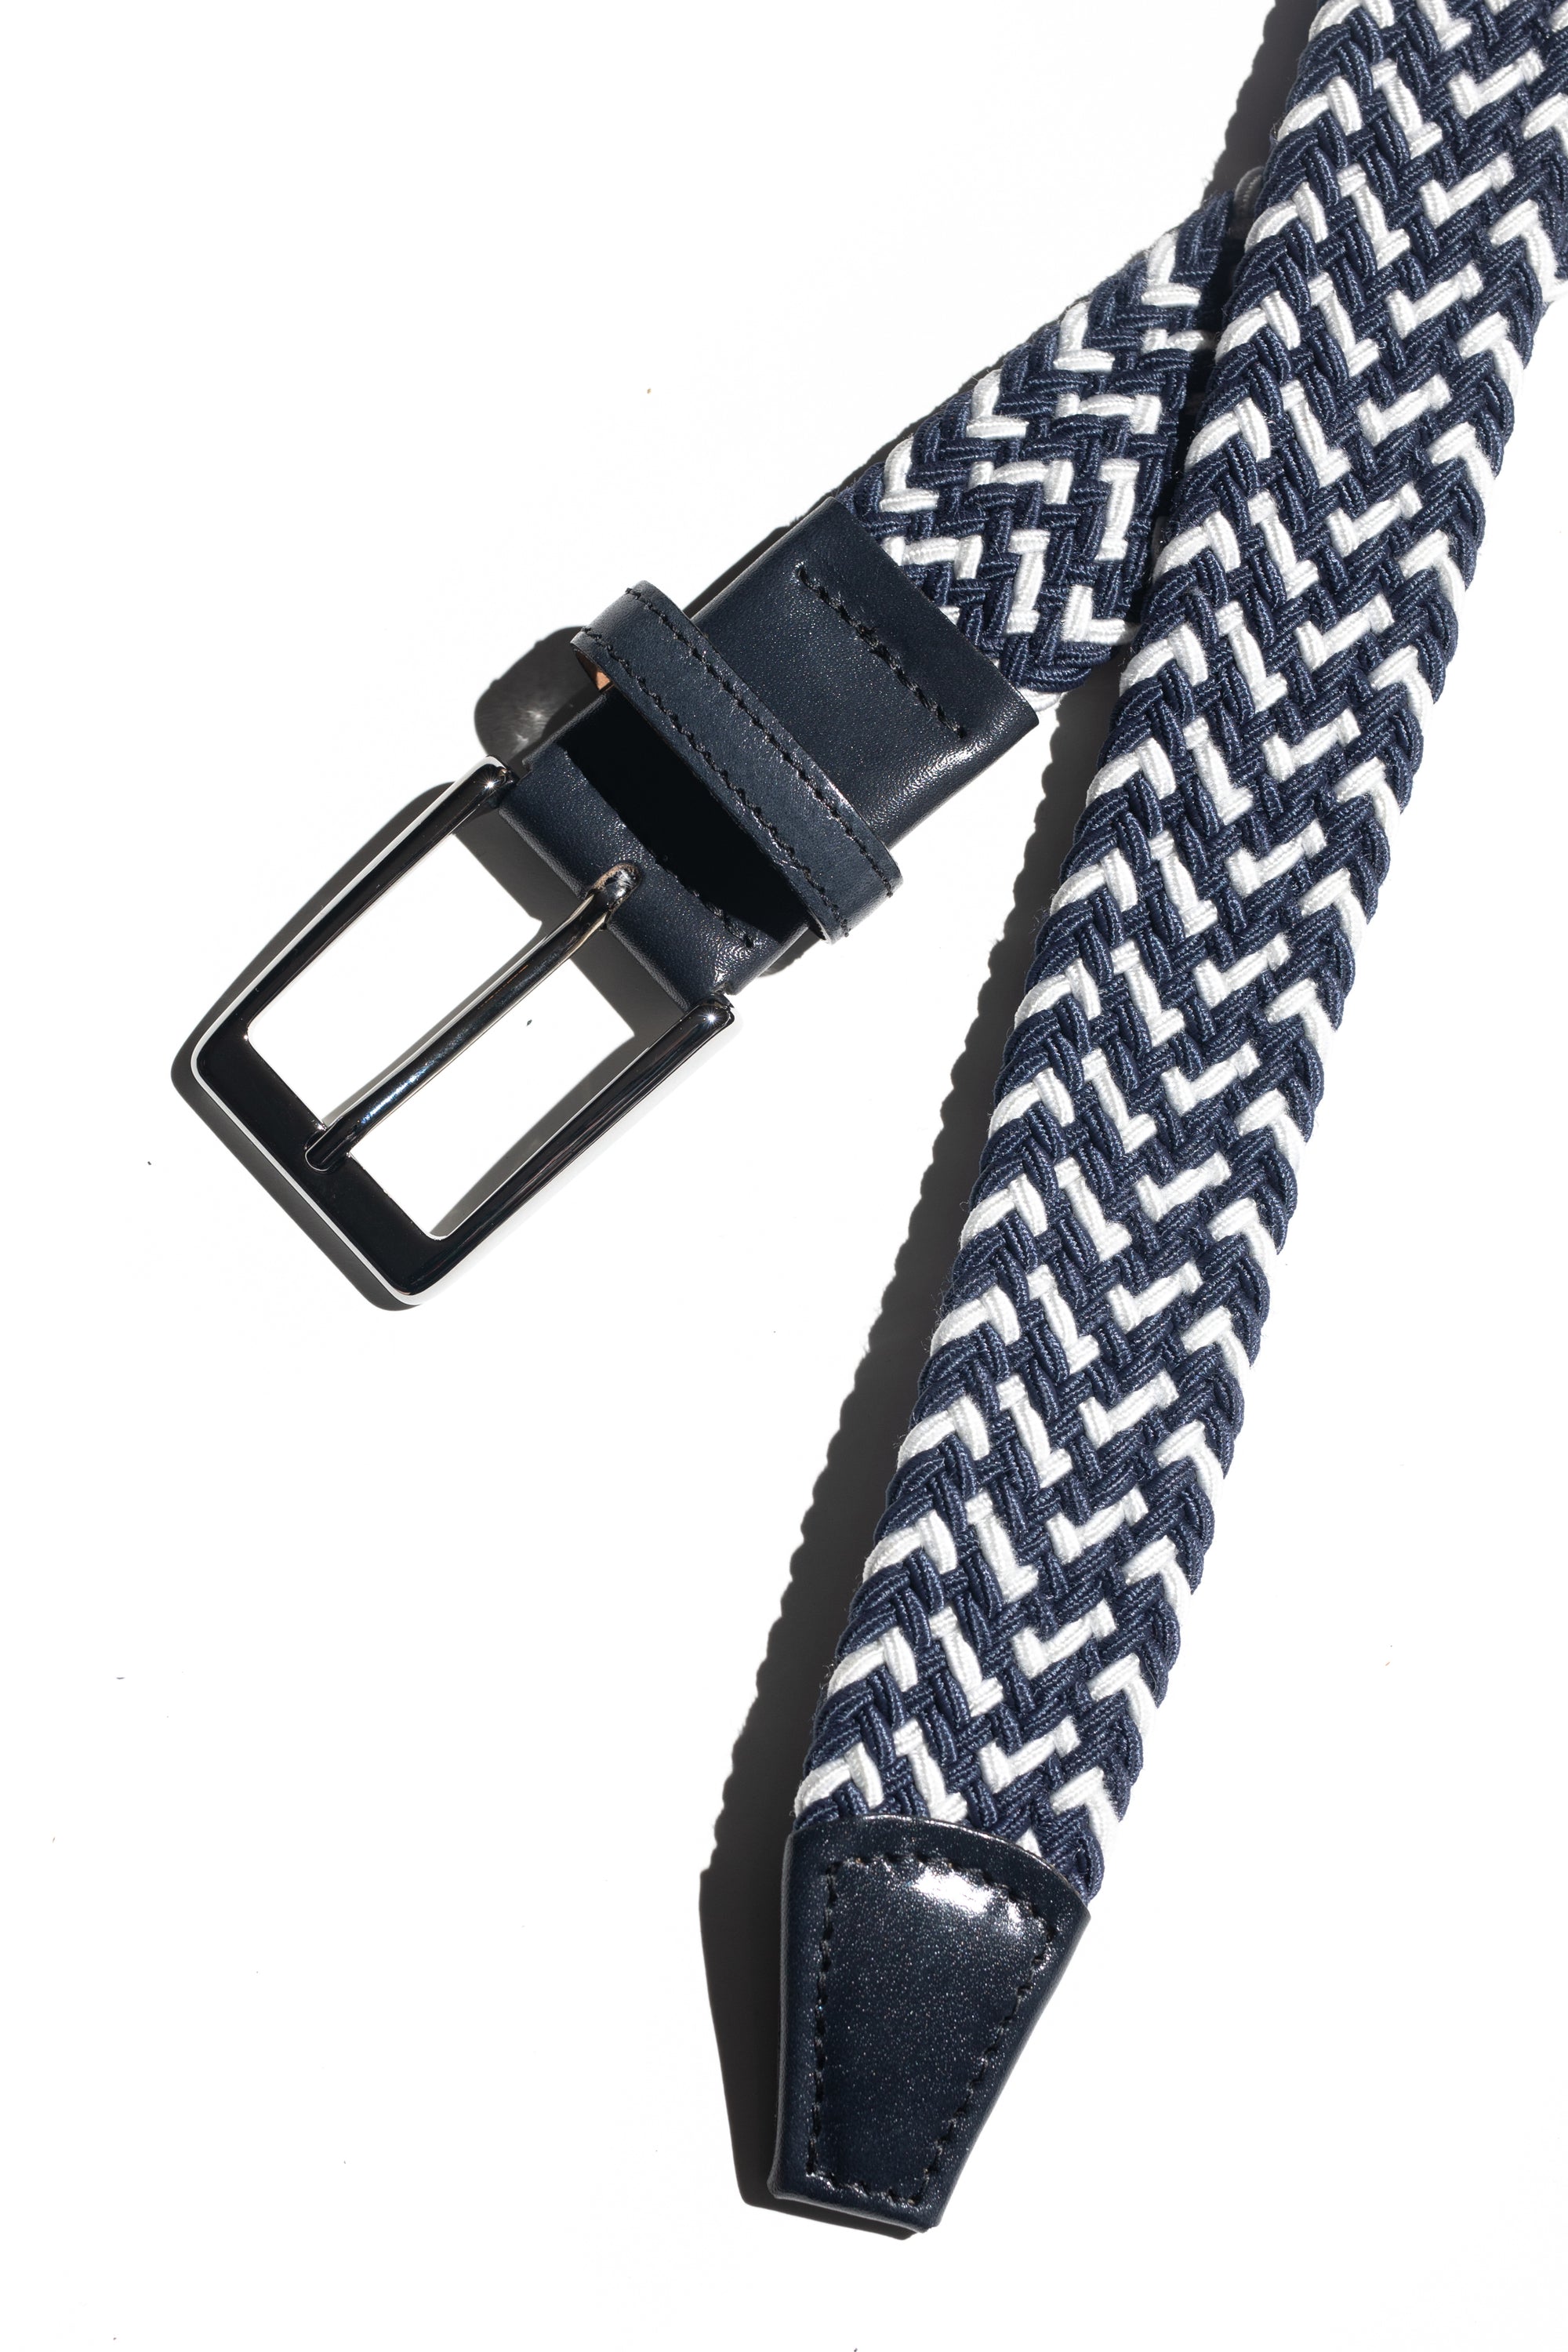 Multi Navy and White - Woven Stretch Belt - Stolen Riches